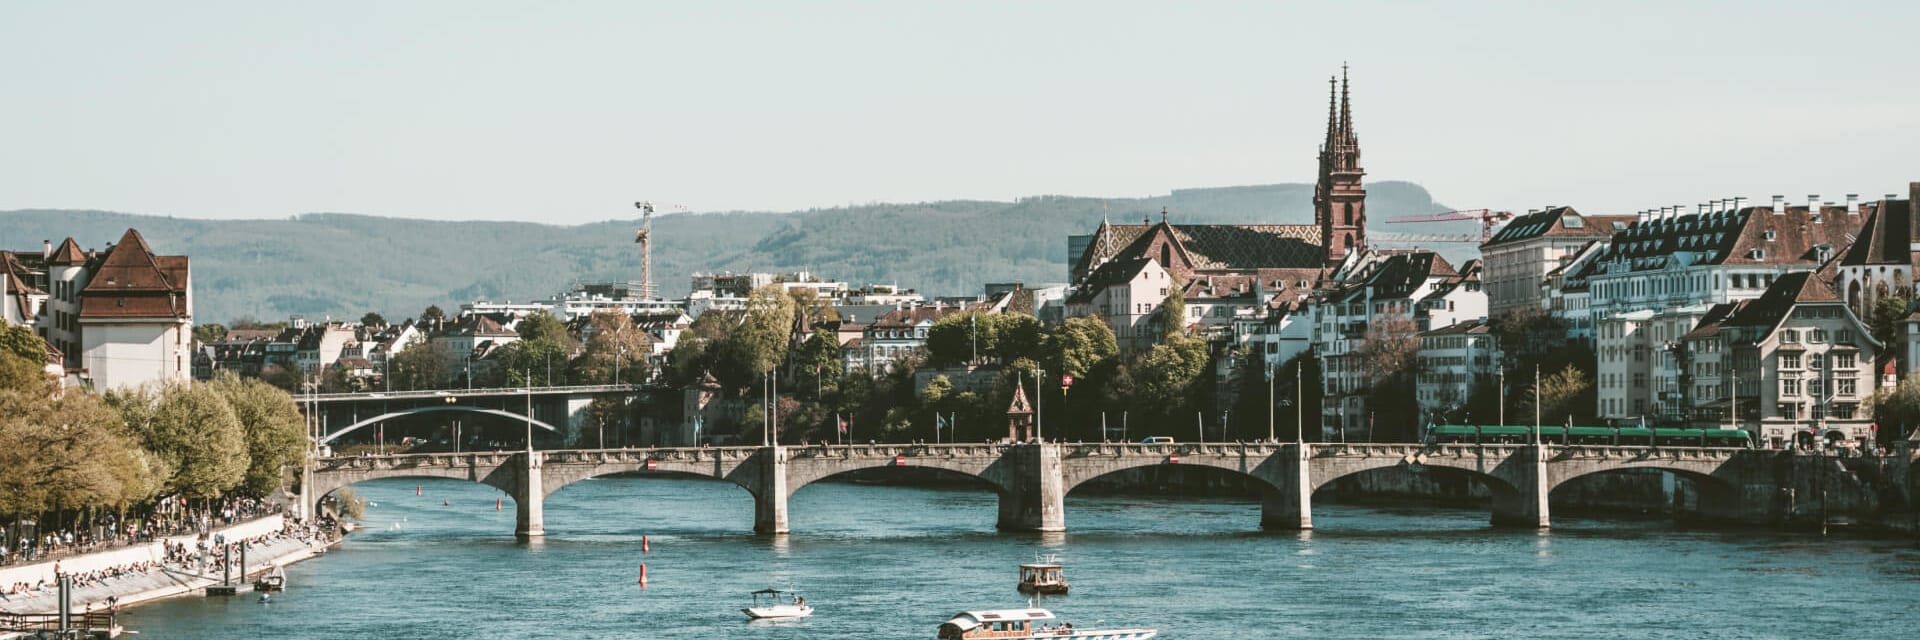 A view of a bridge crossing the Rhine river in Basel, Switzerland.